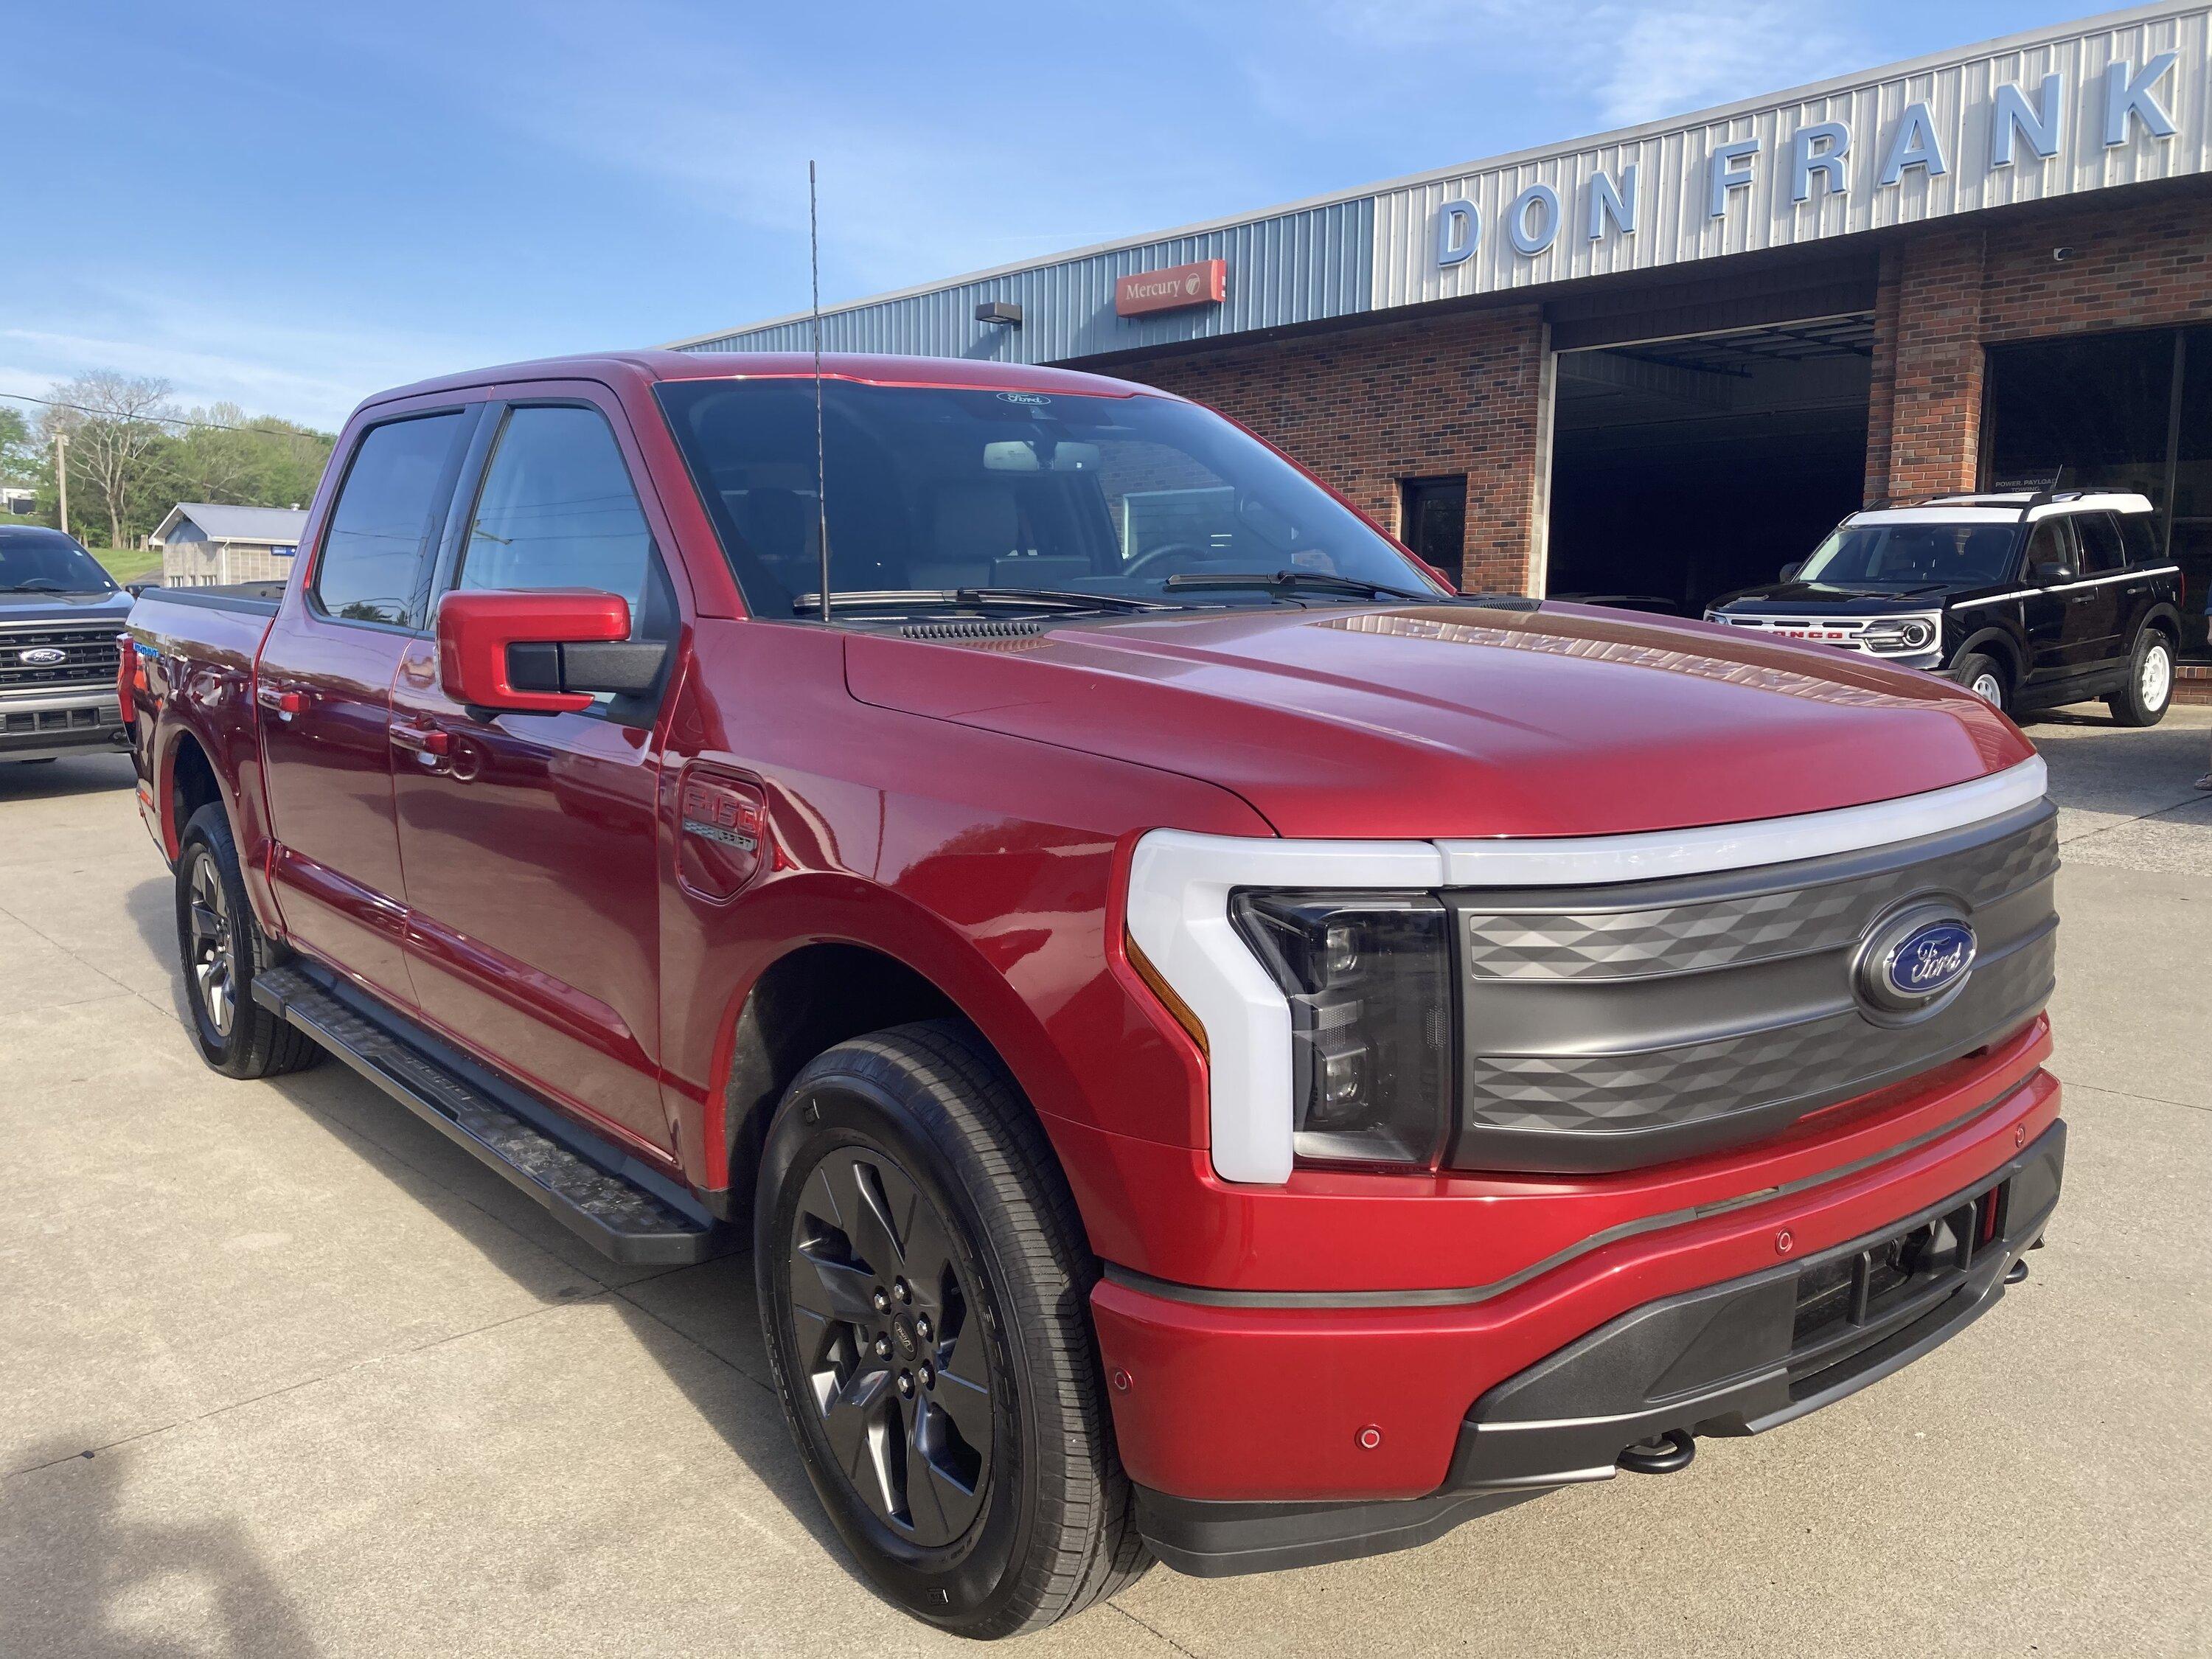 Ford F-150 Lightning F-150 Lightning Owners Registry & Stats [Add Yours]! 📊 IMG_4288